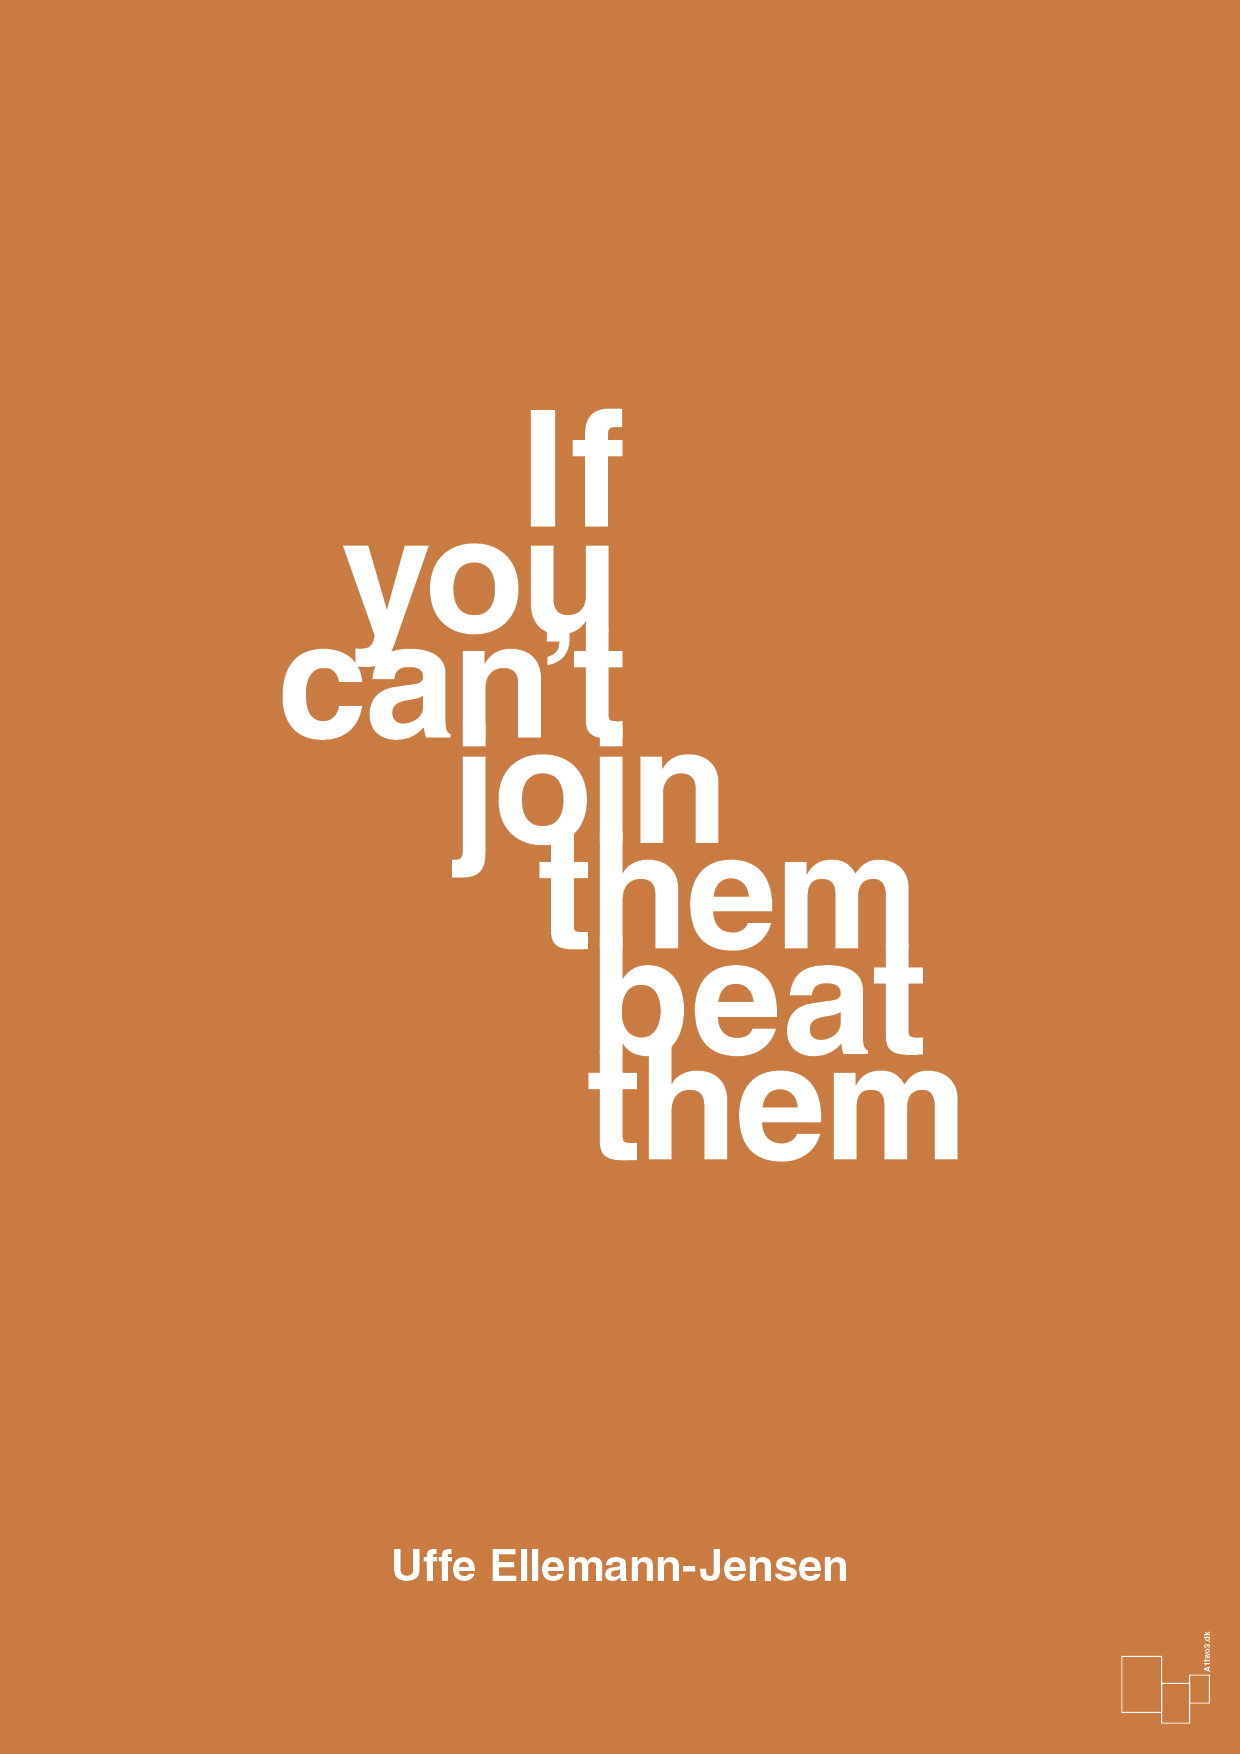 if you cant join them beat them - Plakat med Citater i Rumba Orange